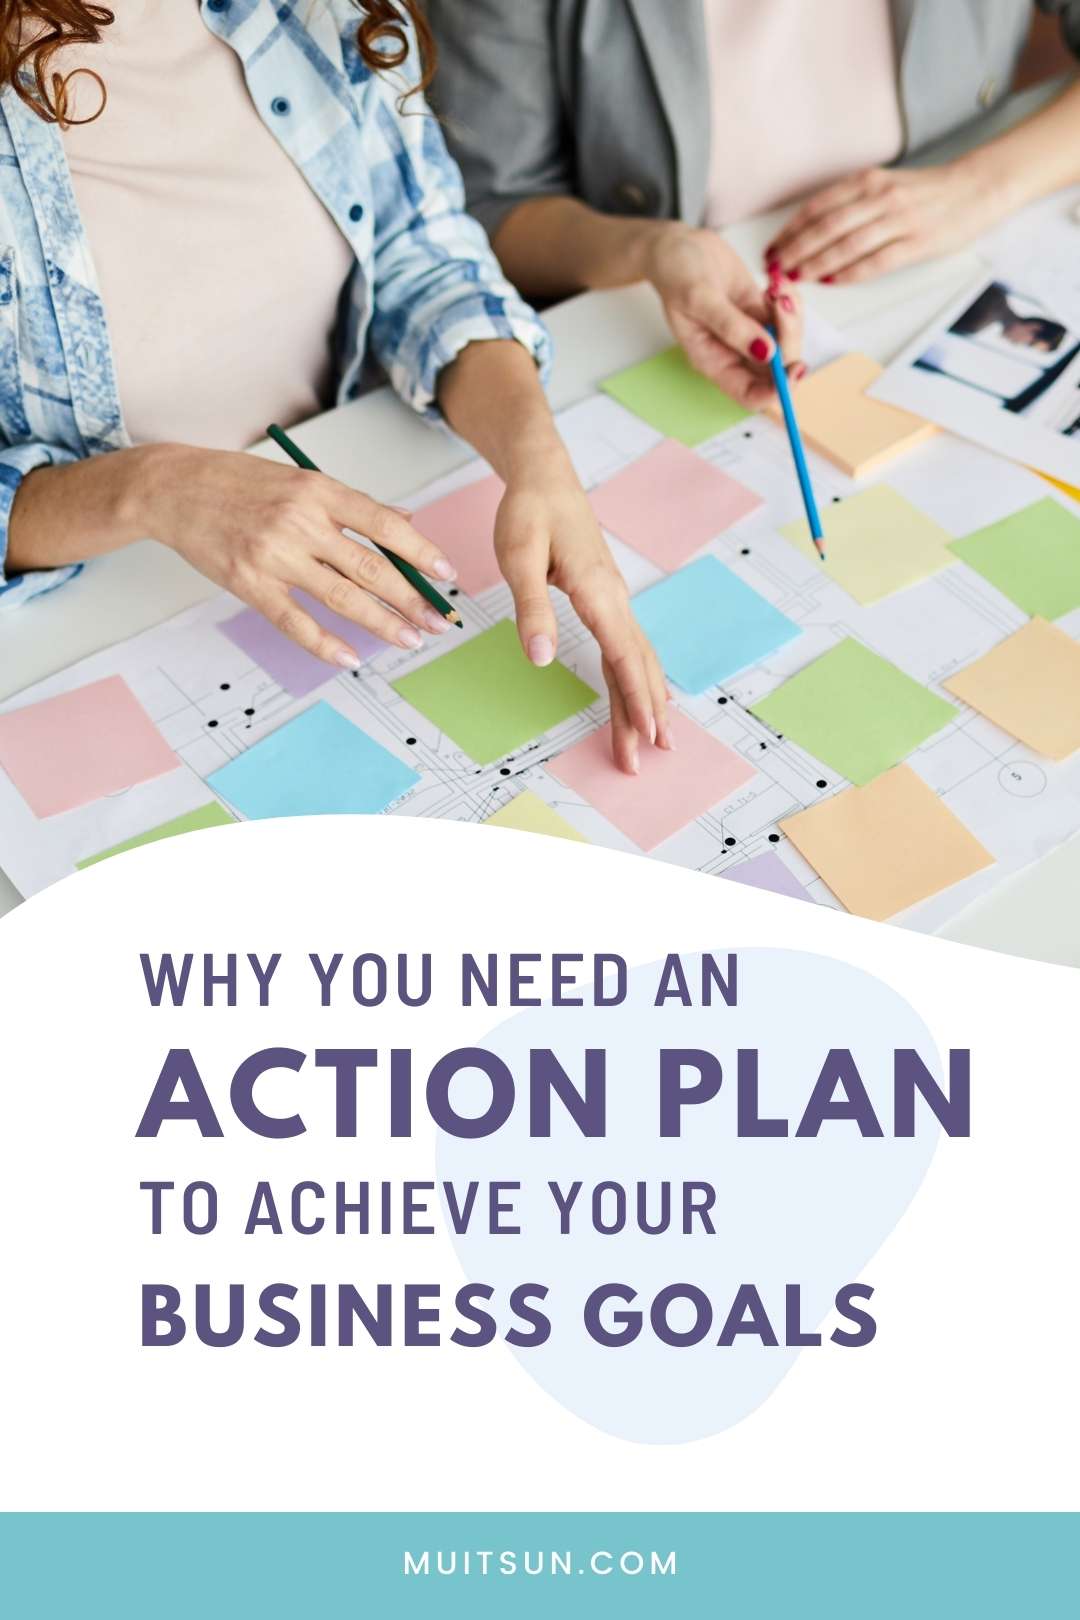 Why You Need An Action Plan to Achieve Your Business Goals